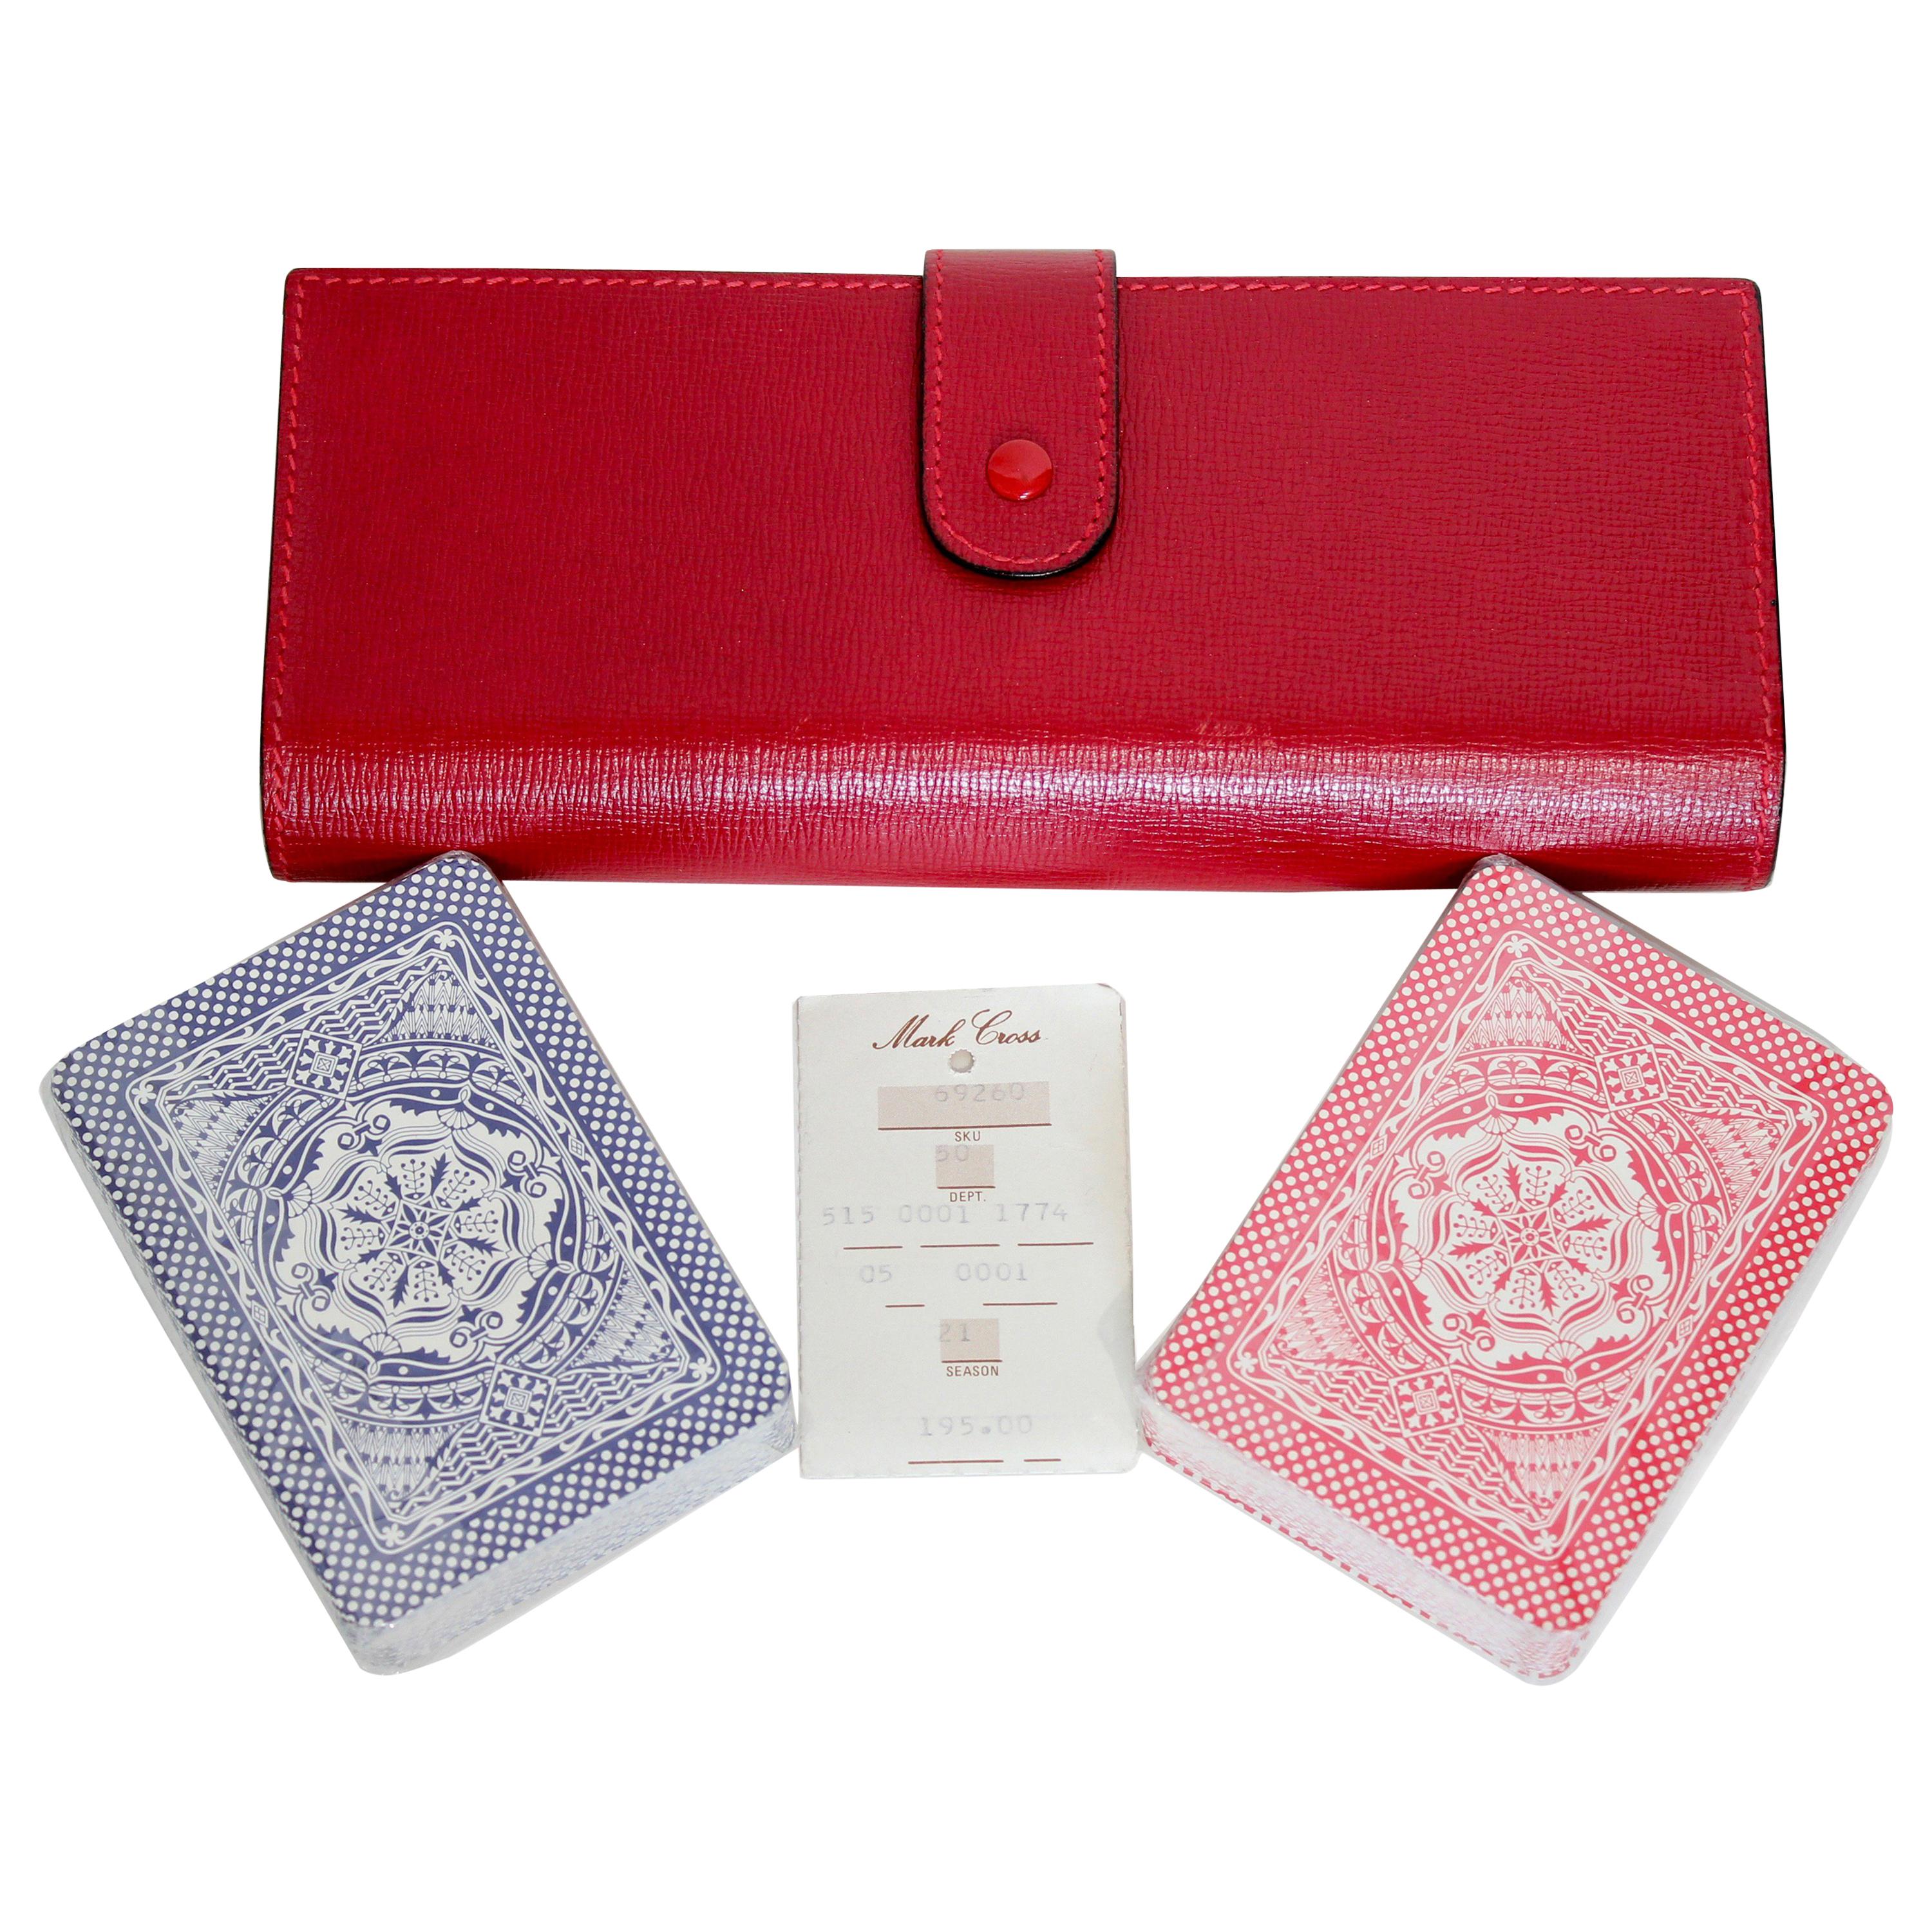 New Mark Cross Red Saffiano Leather Game Set Travel Playing Cards Notepad & Pen 